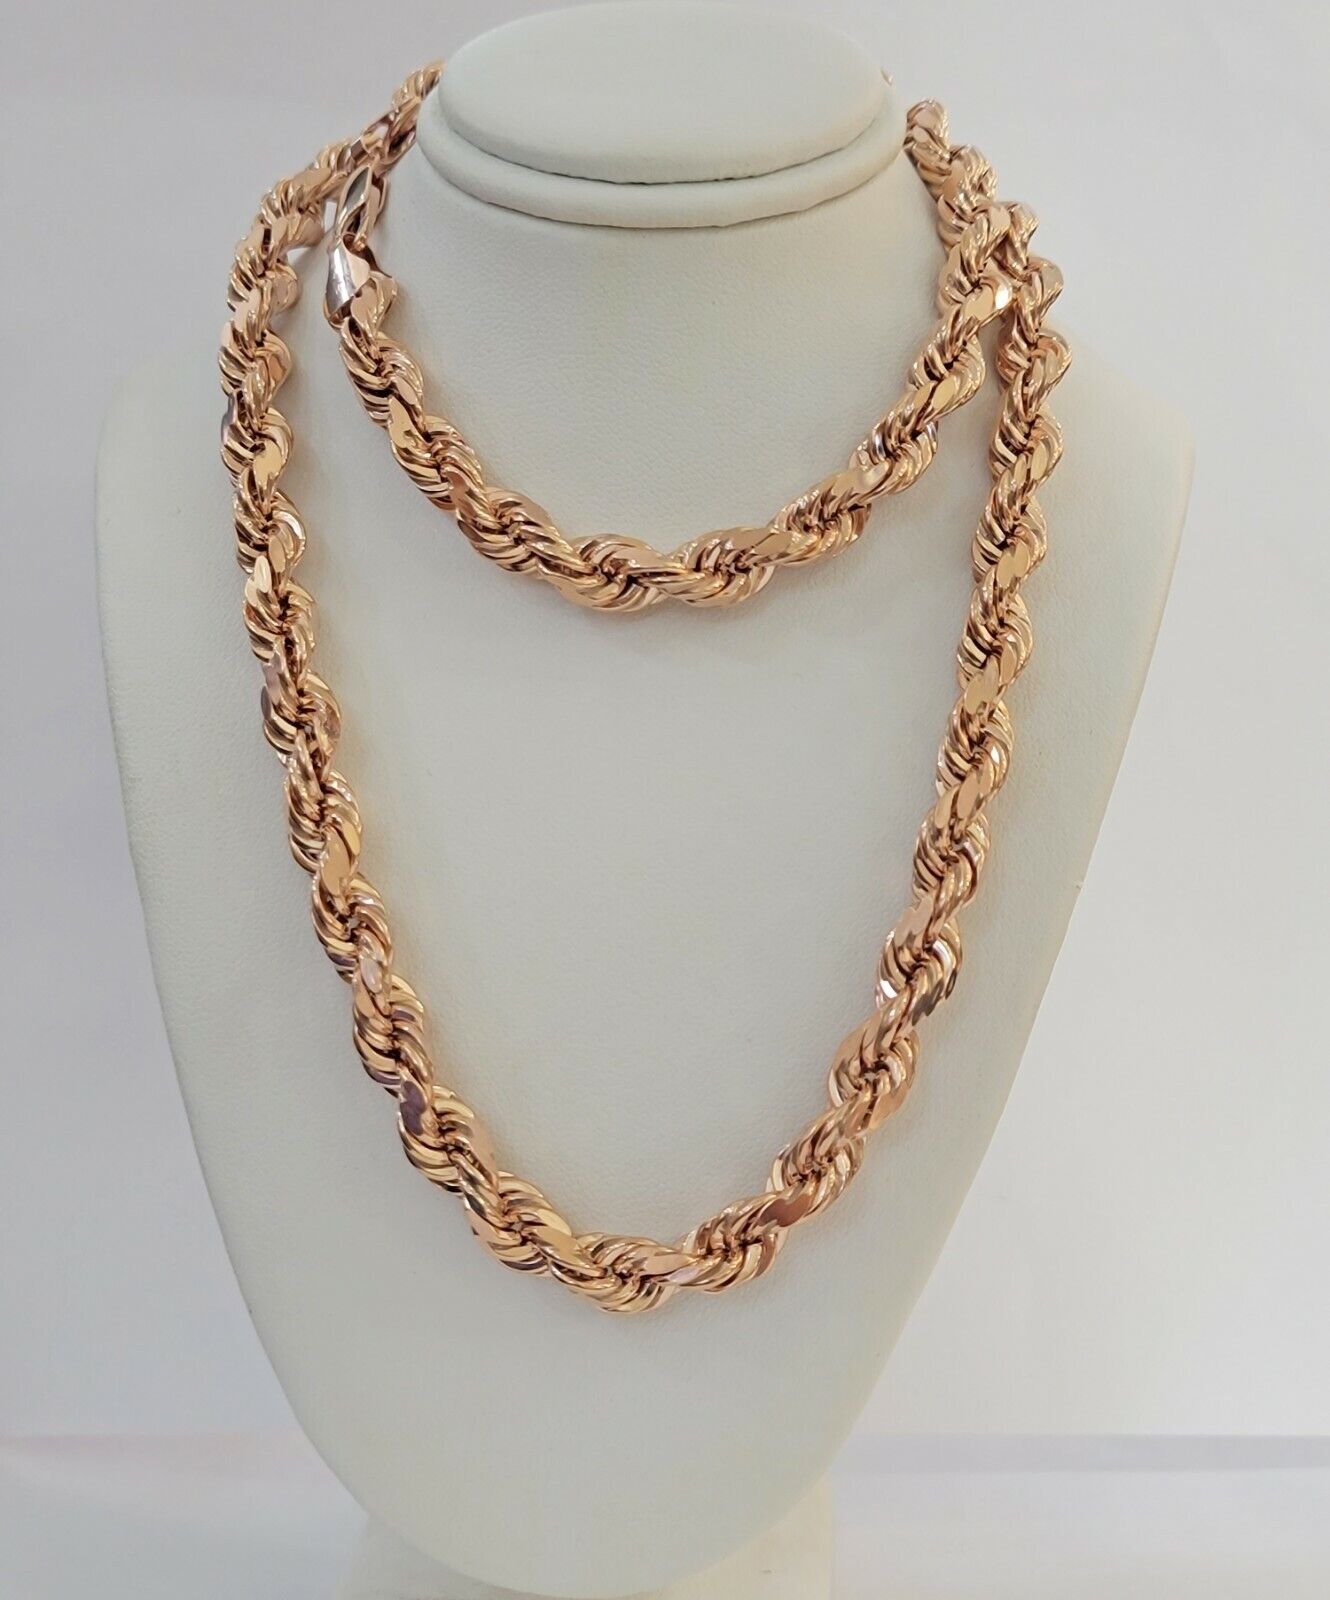 Rope Chain Necklace Real 10k Rose Gold 7mm 20"-26" Inch Diamond Cuts HEAVY SOLID